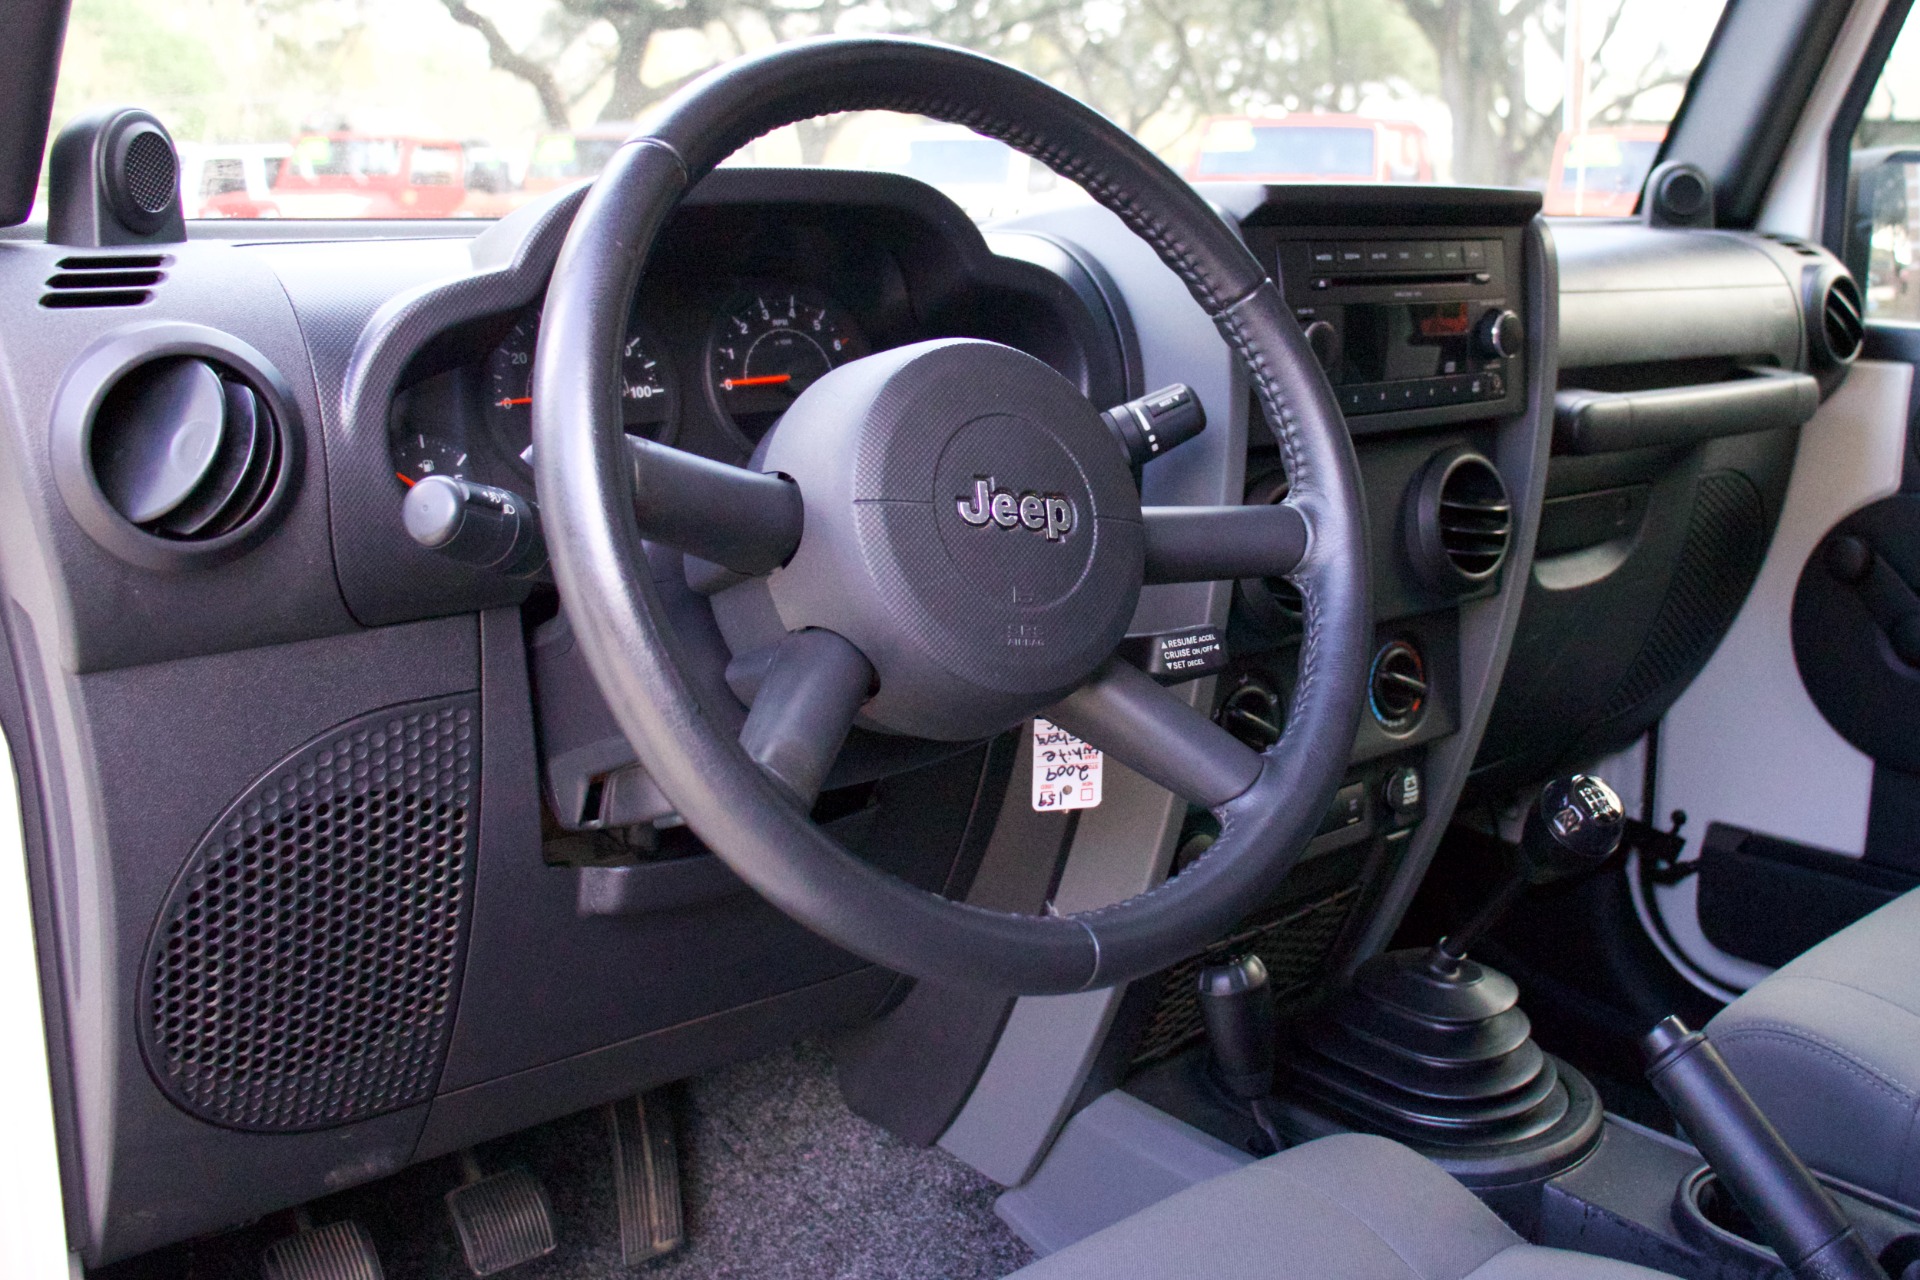 Used 2009 Jeep Wrangler X For Sale ($14,995) | Select Jeeps Inc. Stock  #730215